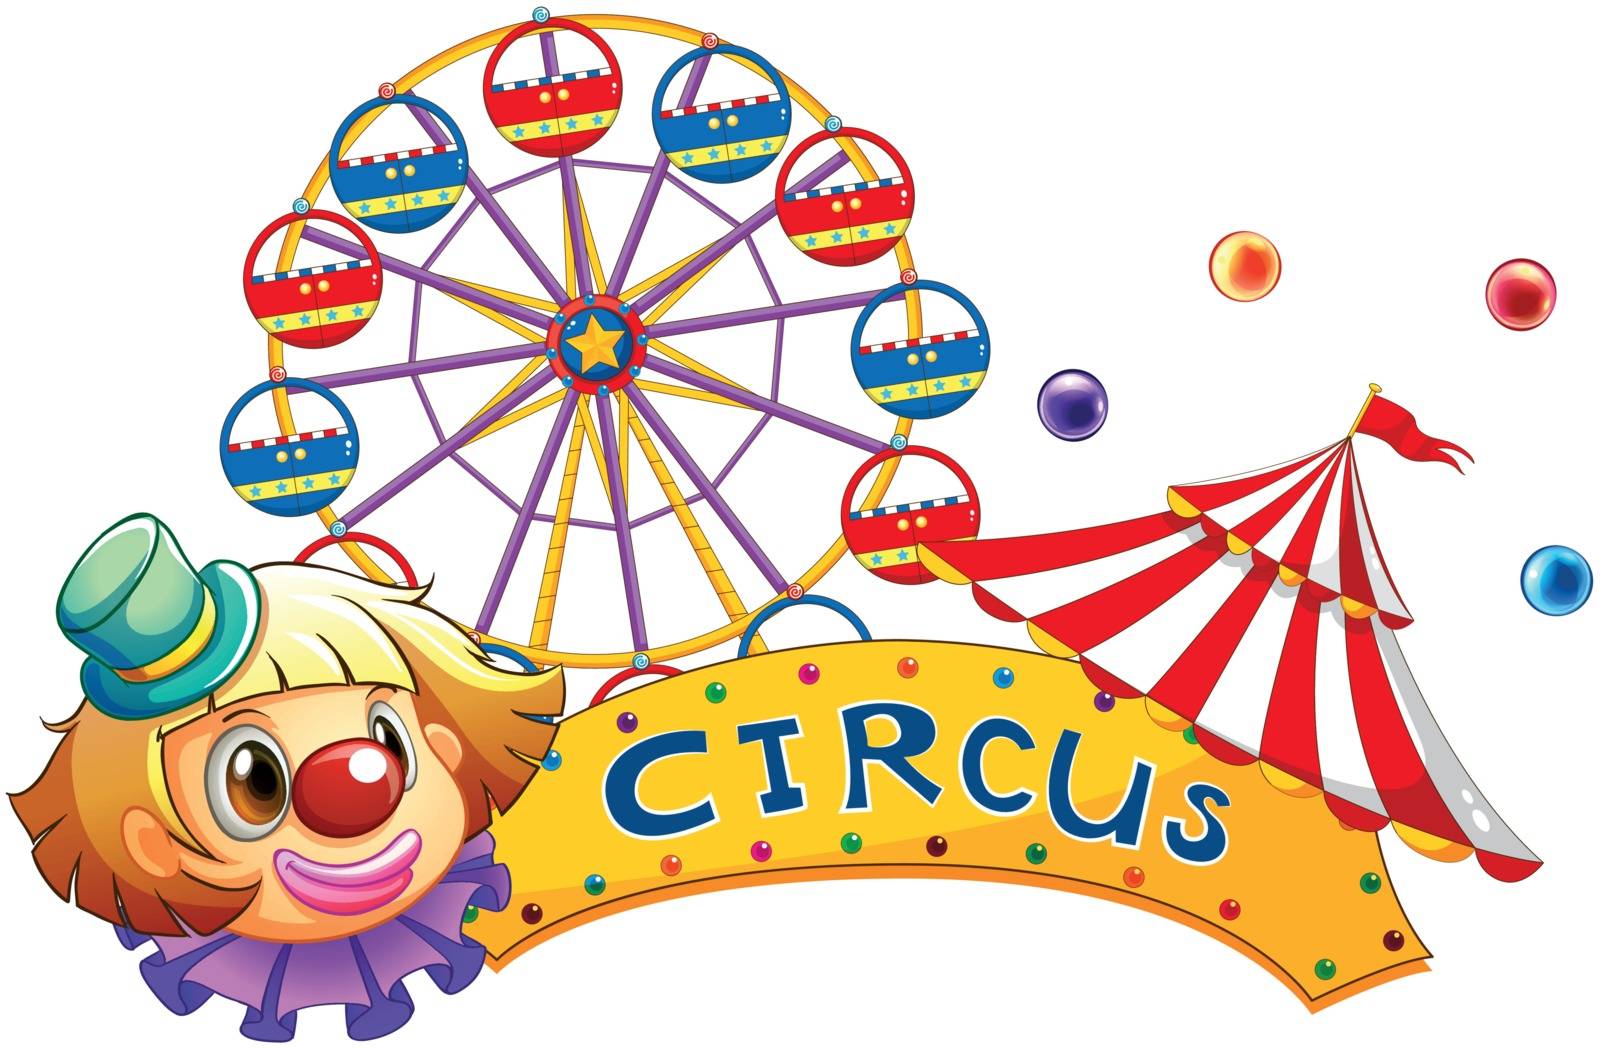 Illustration of a circus signboard on a white background